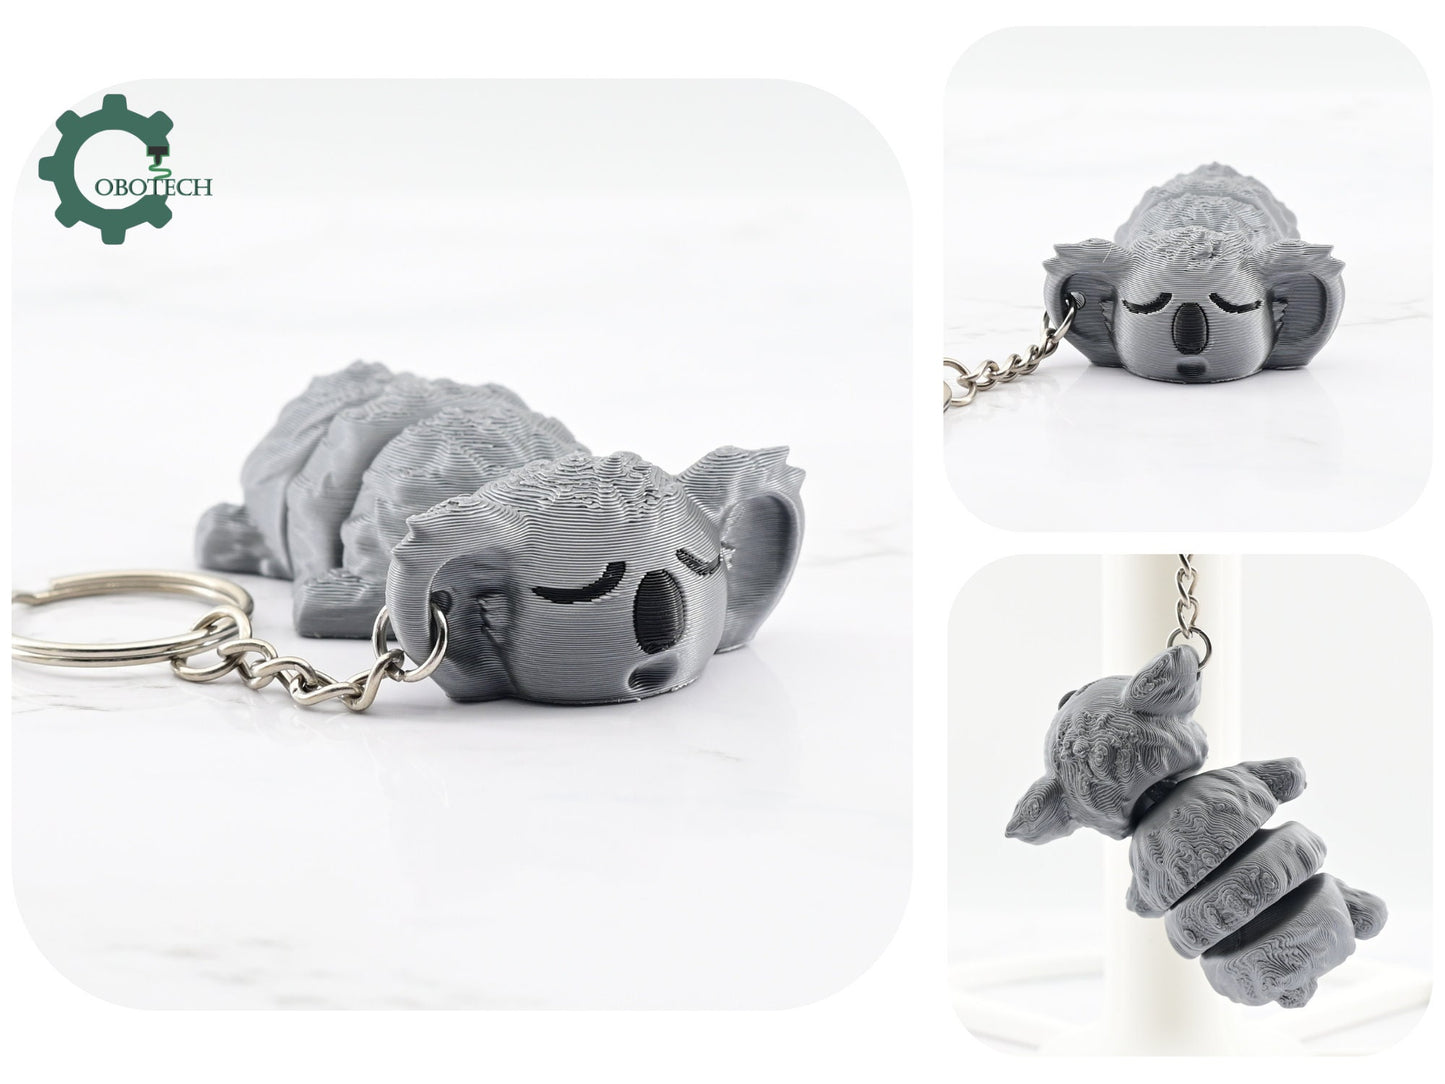 Digital Downloads Cute Articulated Koala Keychain by Cobotech - Cobotech backpack keychain - unique adorable keychain gifts